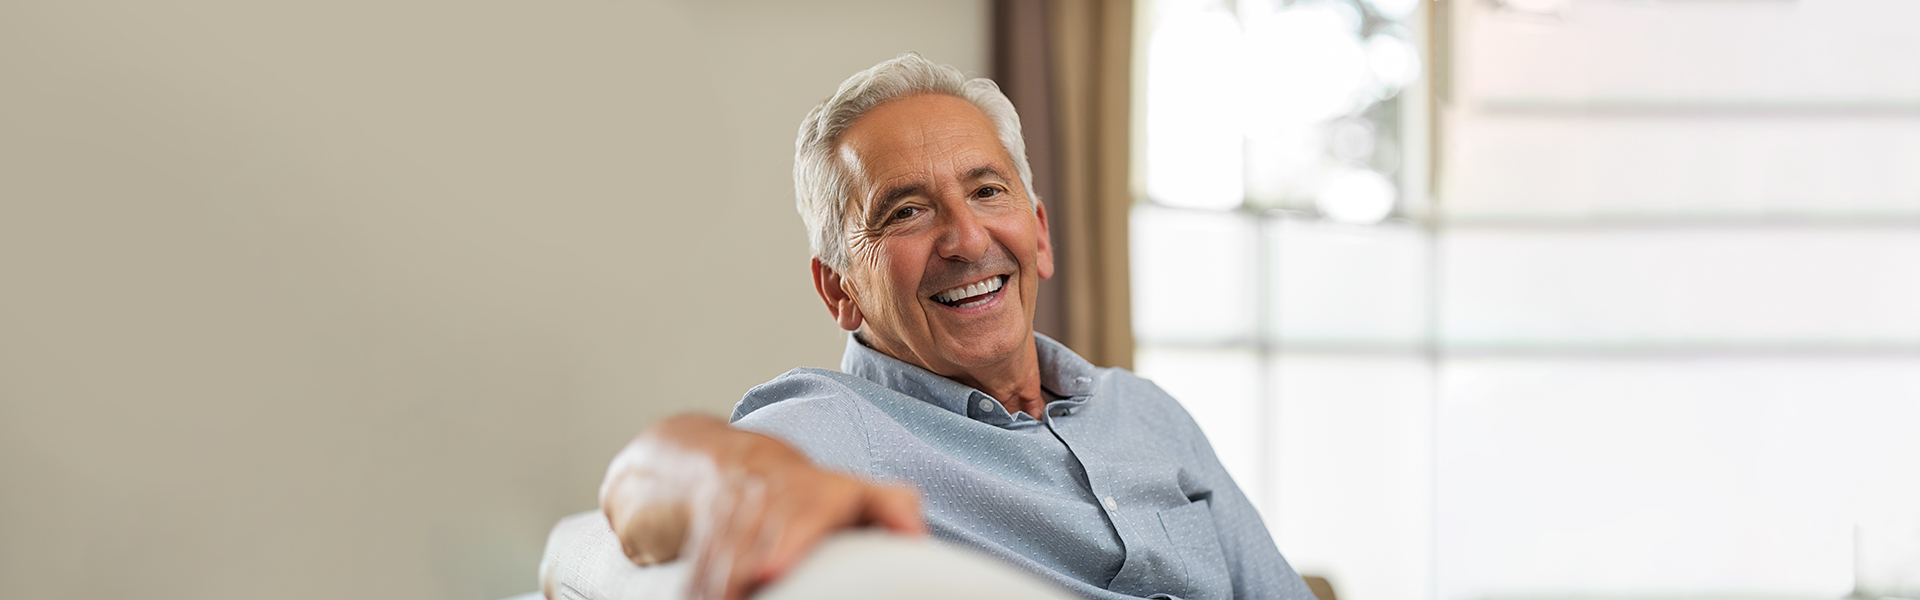 Are Permanent Dentures Better than Implants?